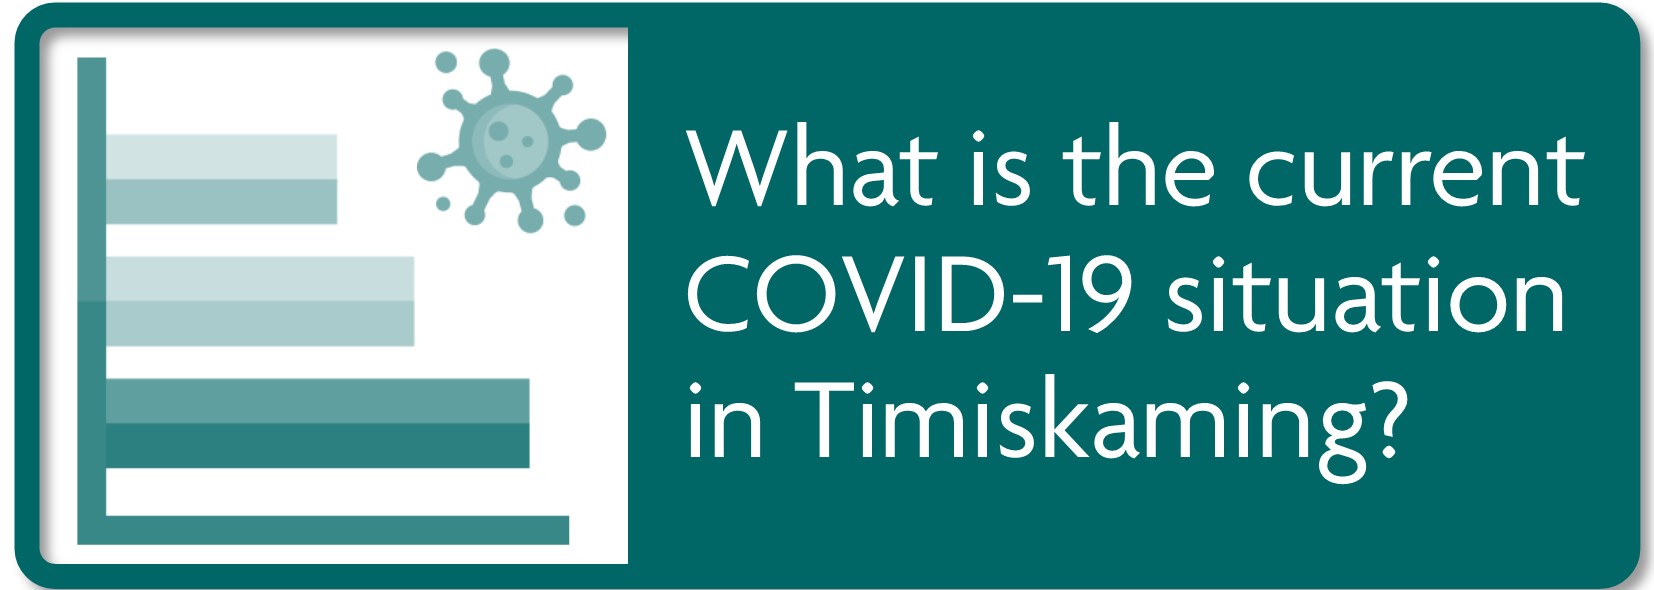 What is the current COVID-19 situation in Timiskaming